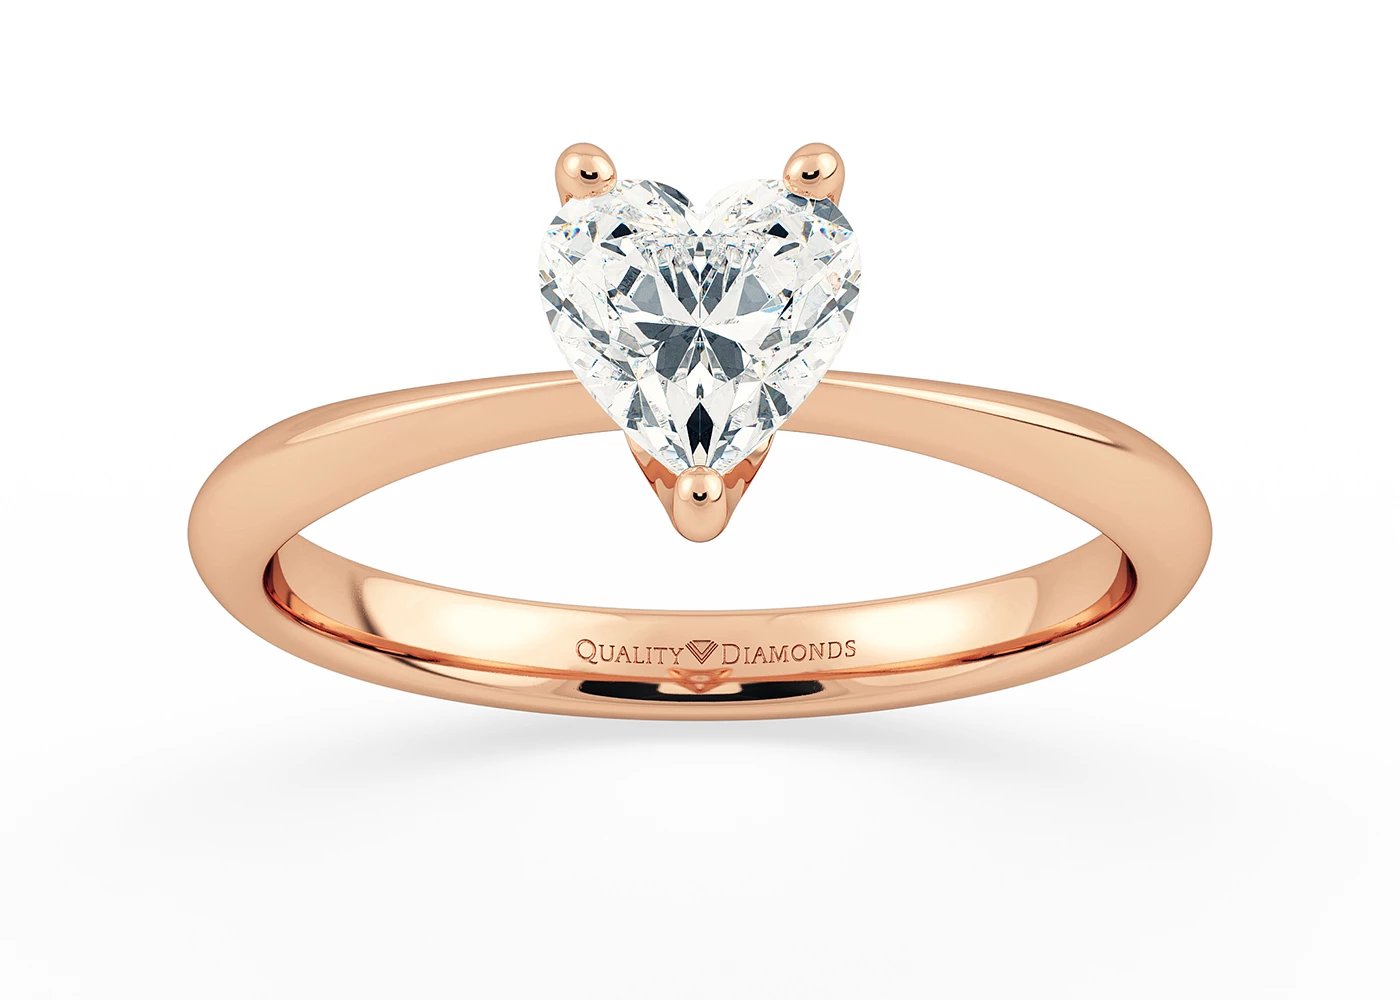 Two Carat Heart Solitaire Diamond Engagement Ring in 18K Rose Gold